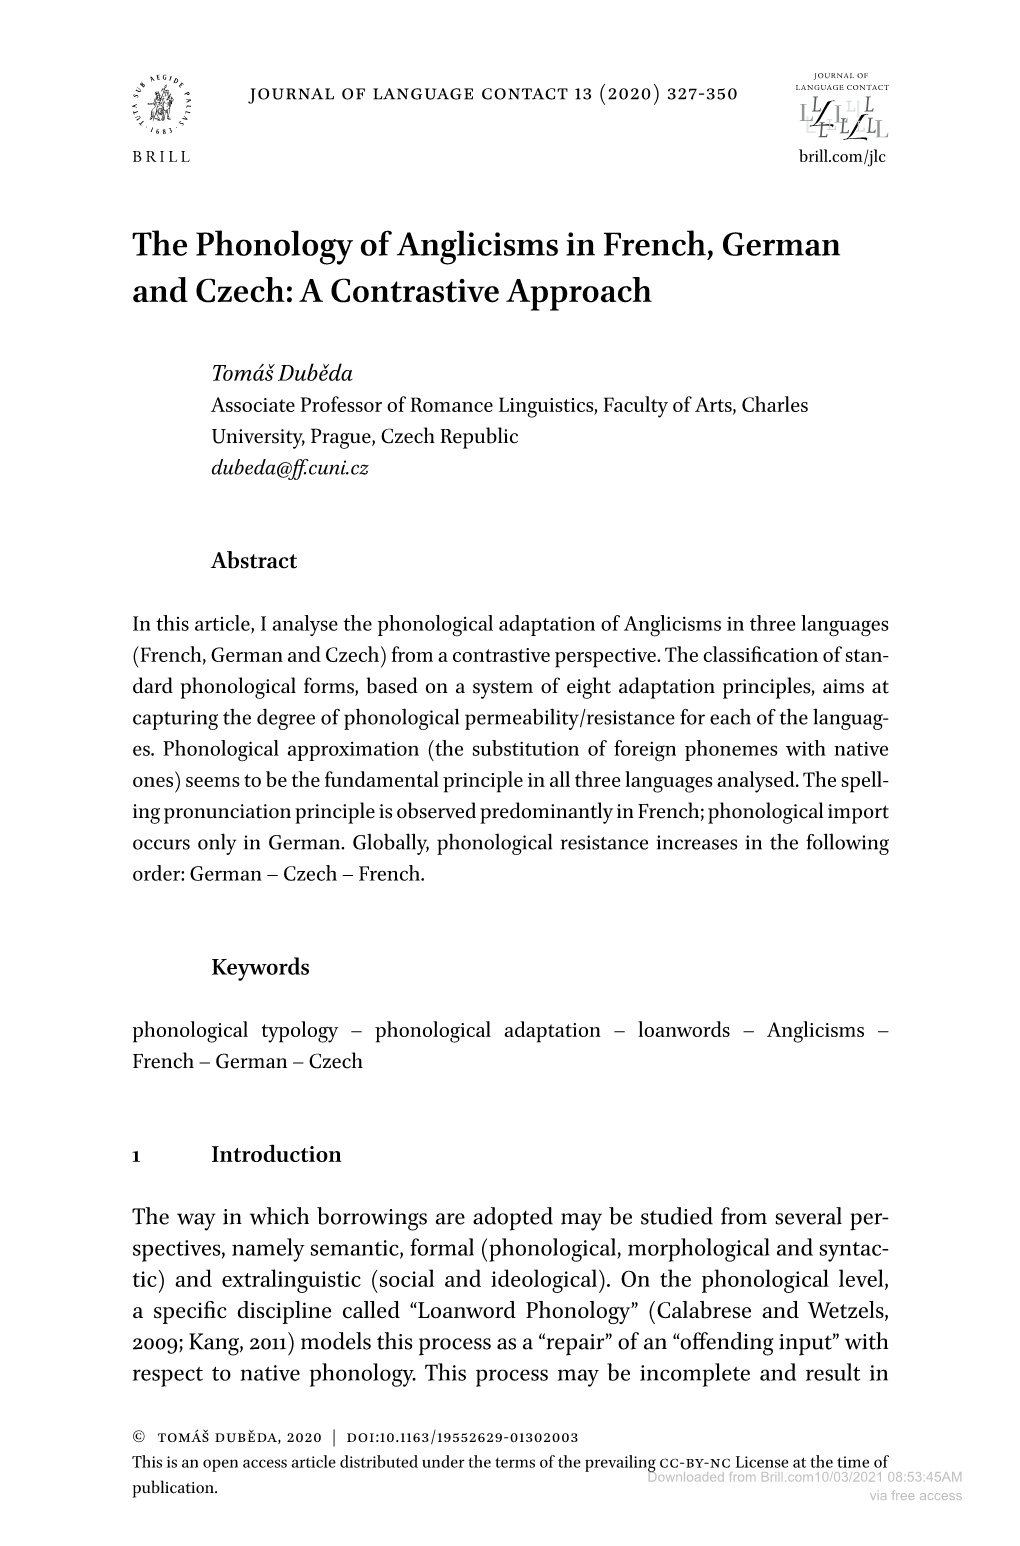 The Phonology of Anglicisms in French, German and Czech: a Contrastive Approach